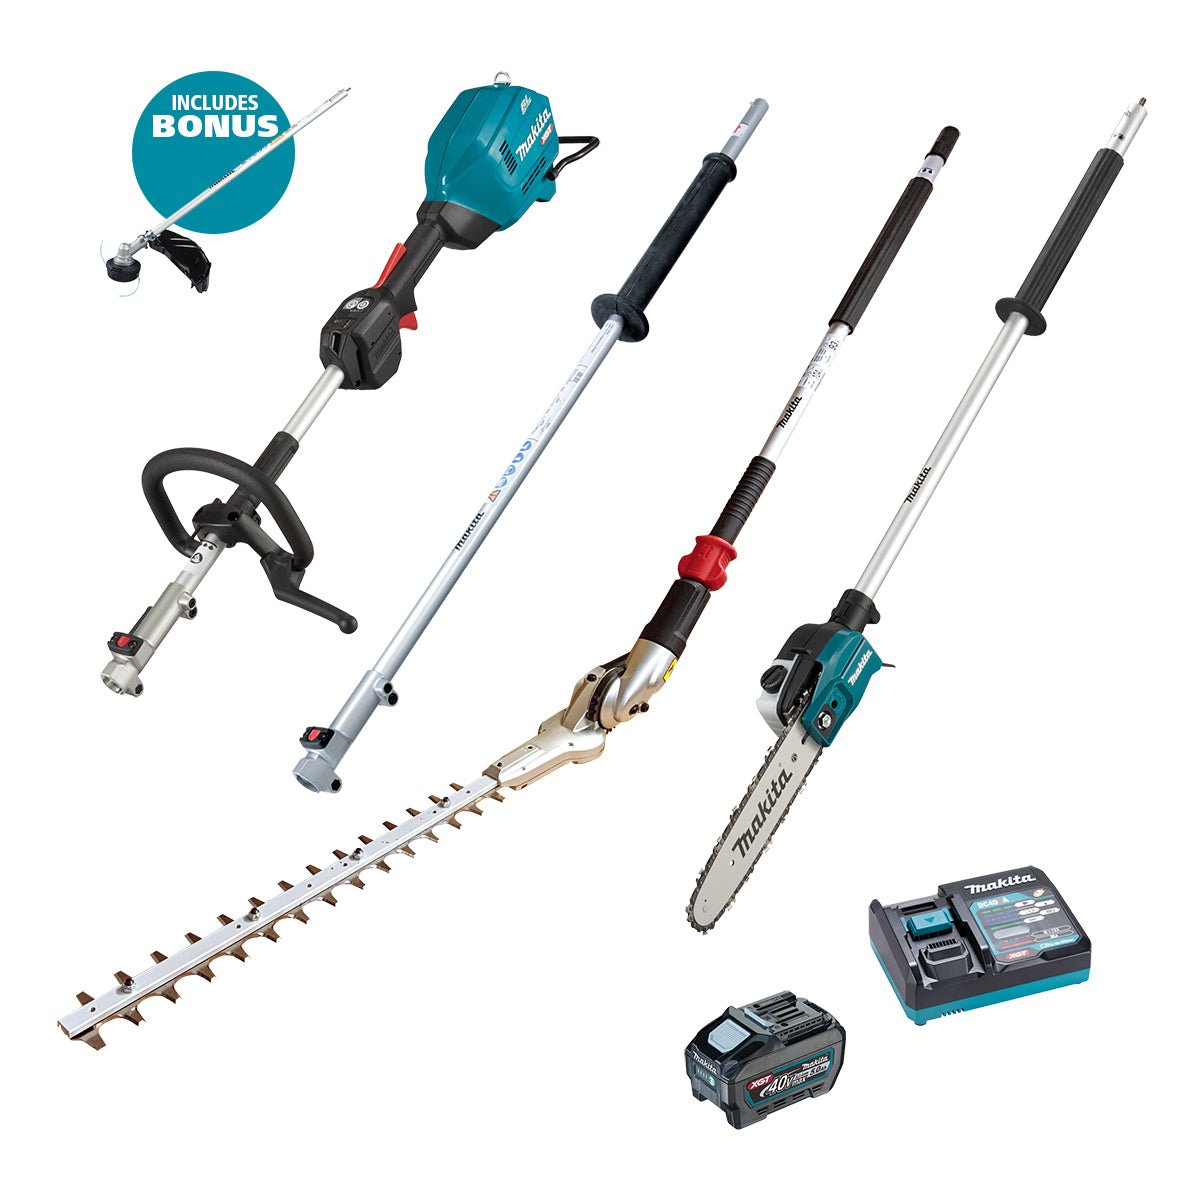 *Limited Edition* 40V Max Brushless Multi-Function Powerhead Kit UX01GT103-B by Makita